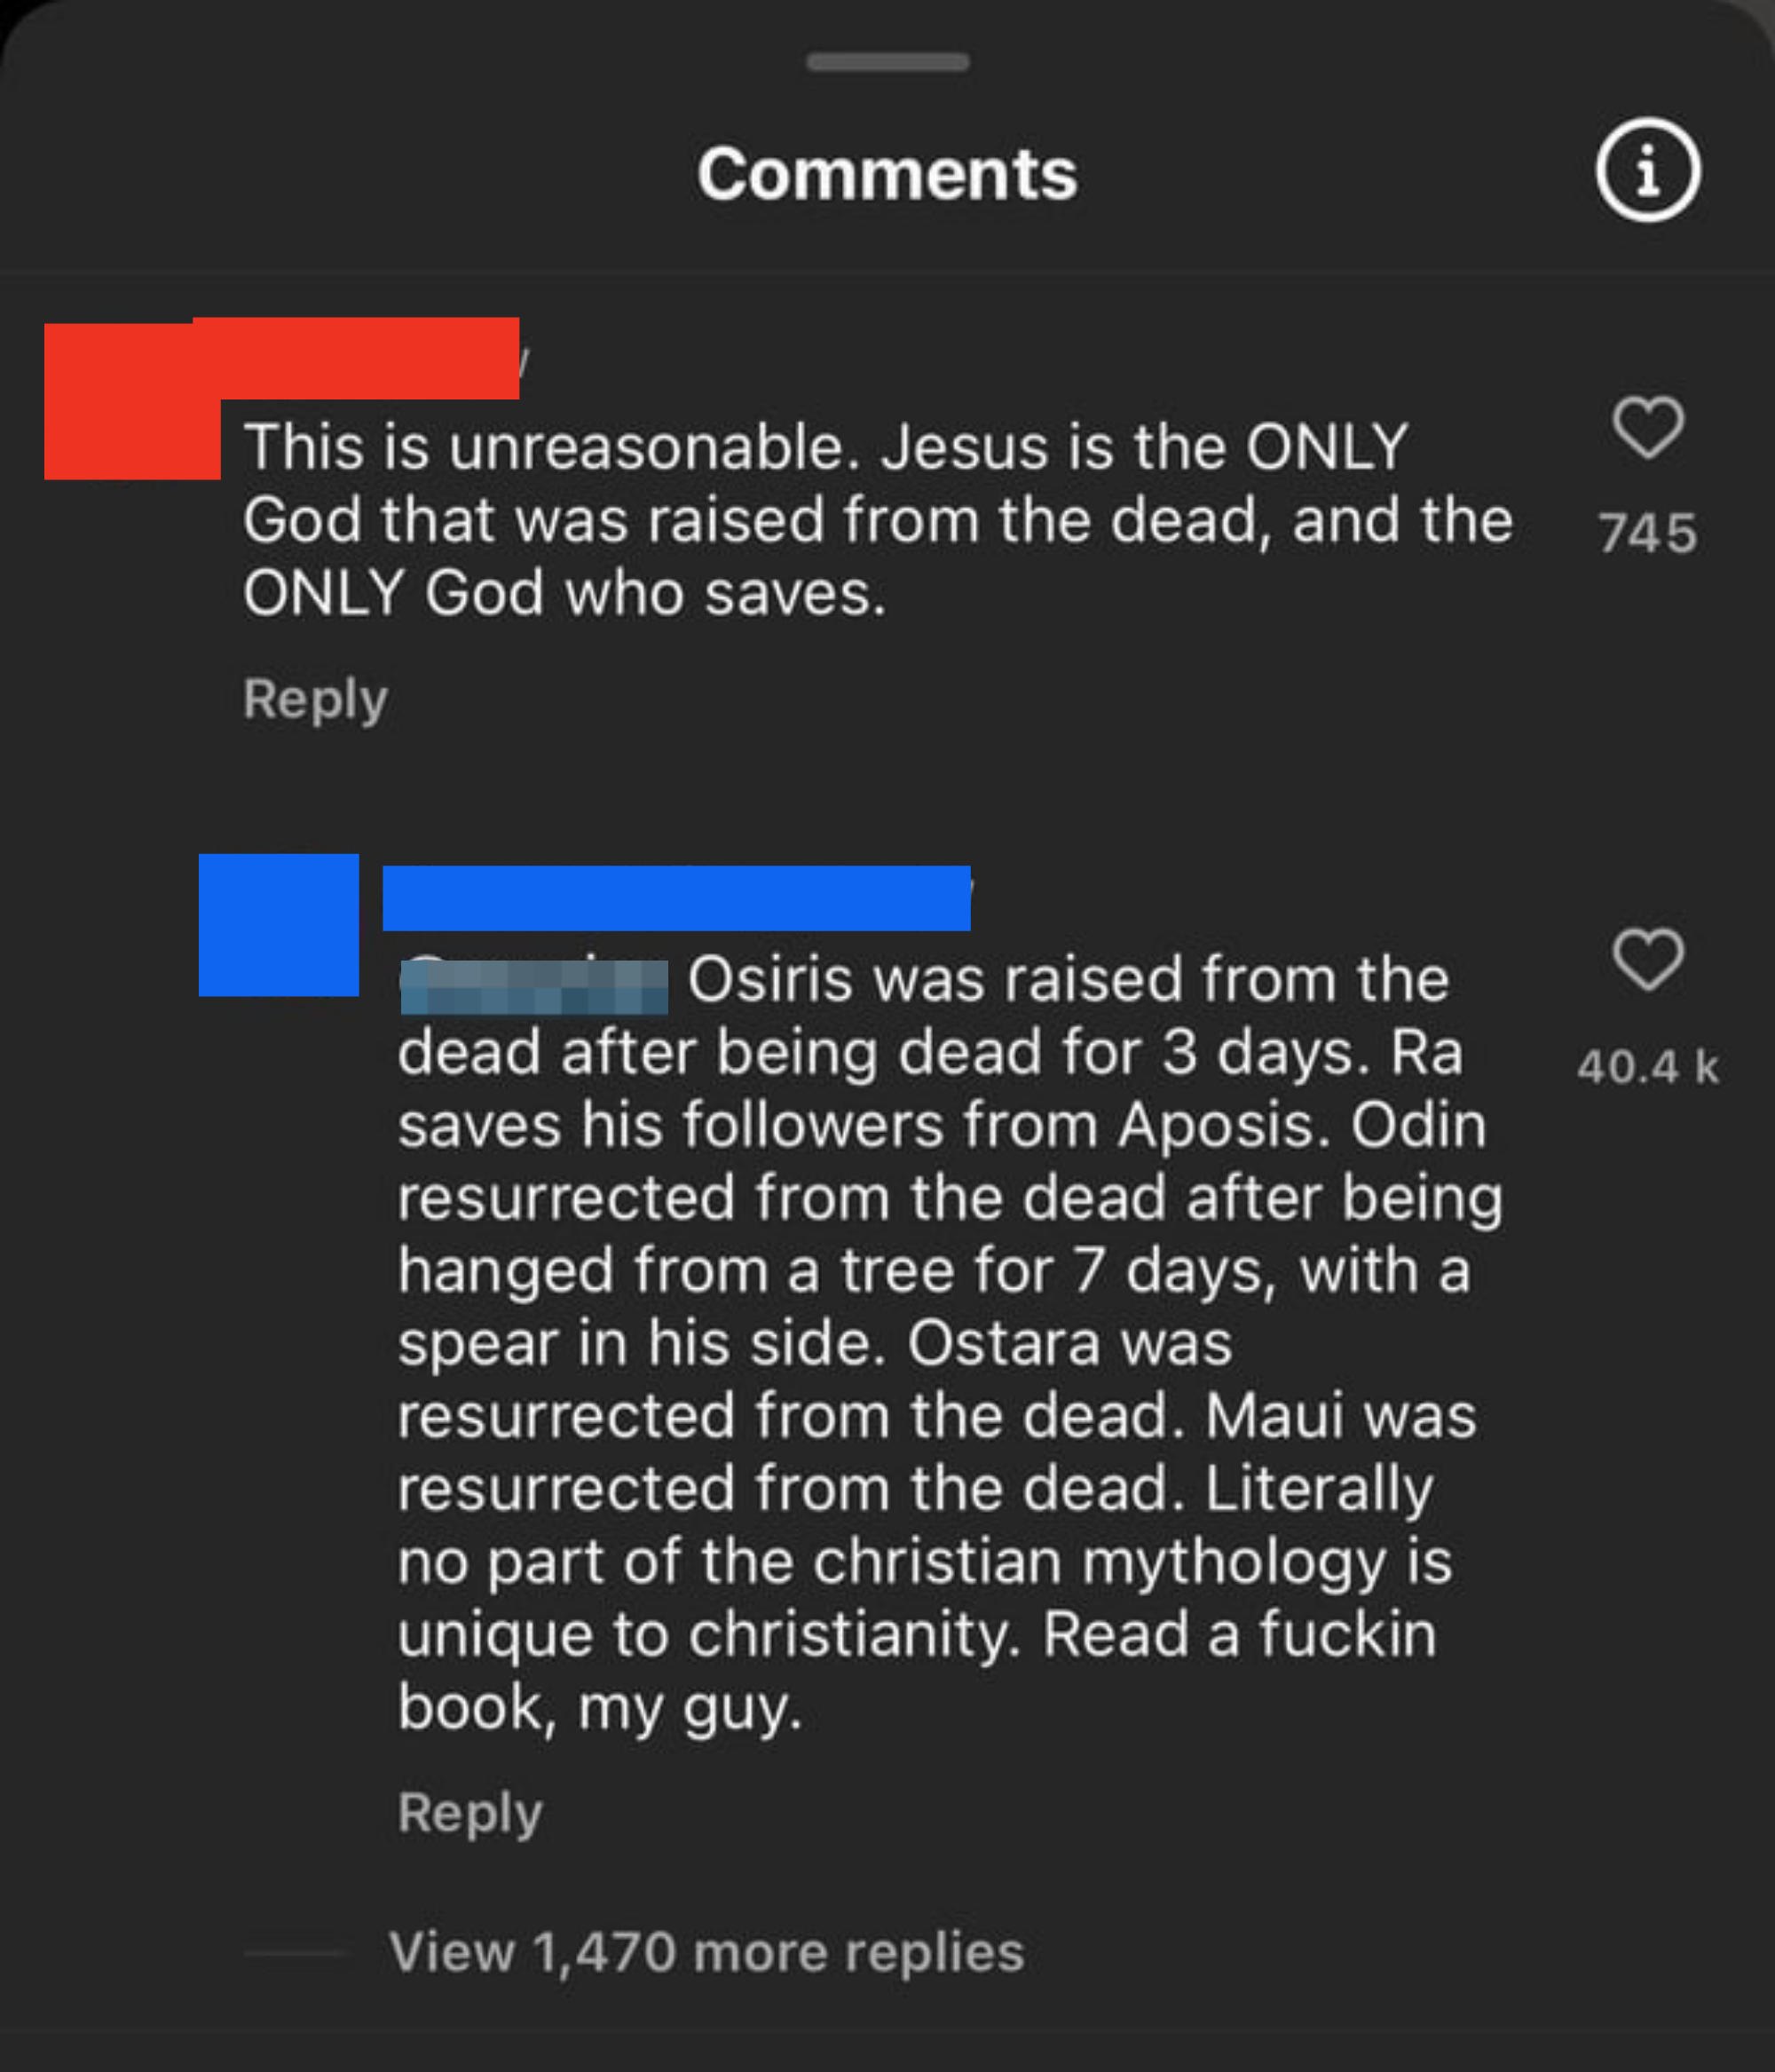 A commenter claiming Jesus is the only deity to raise from the dead and save others, with another commenter pointing out the many examples of gods who resurrected and saved souls